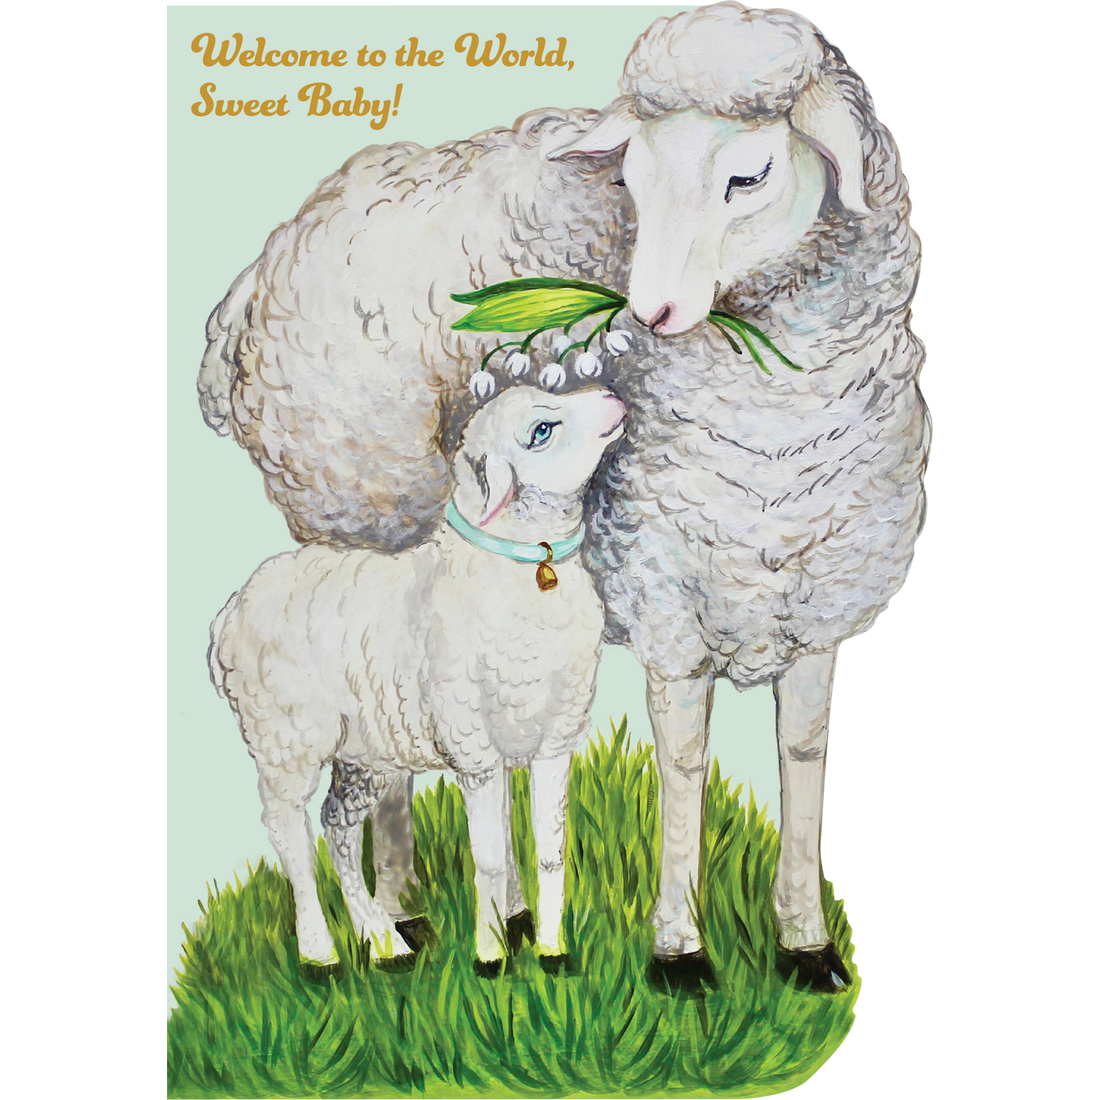 A whimsical illustration of a fluffy white sheep holding a sprig of flowers over the head of a small white lamb wearing a bell around its neck, with &quot;Welcome to the World, Sweet Baby!&quot; printed in gold across the top of the card.